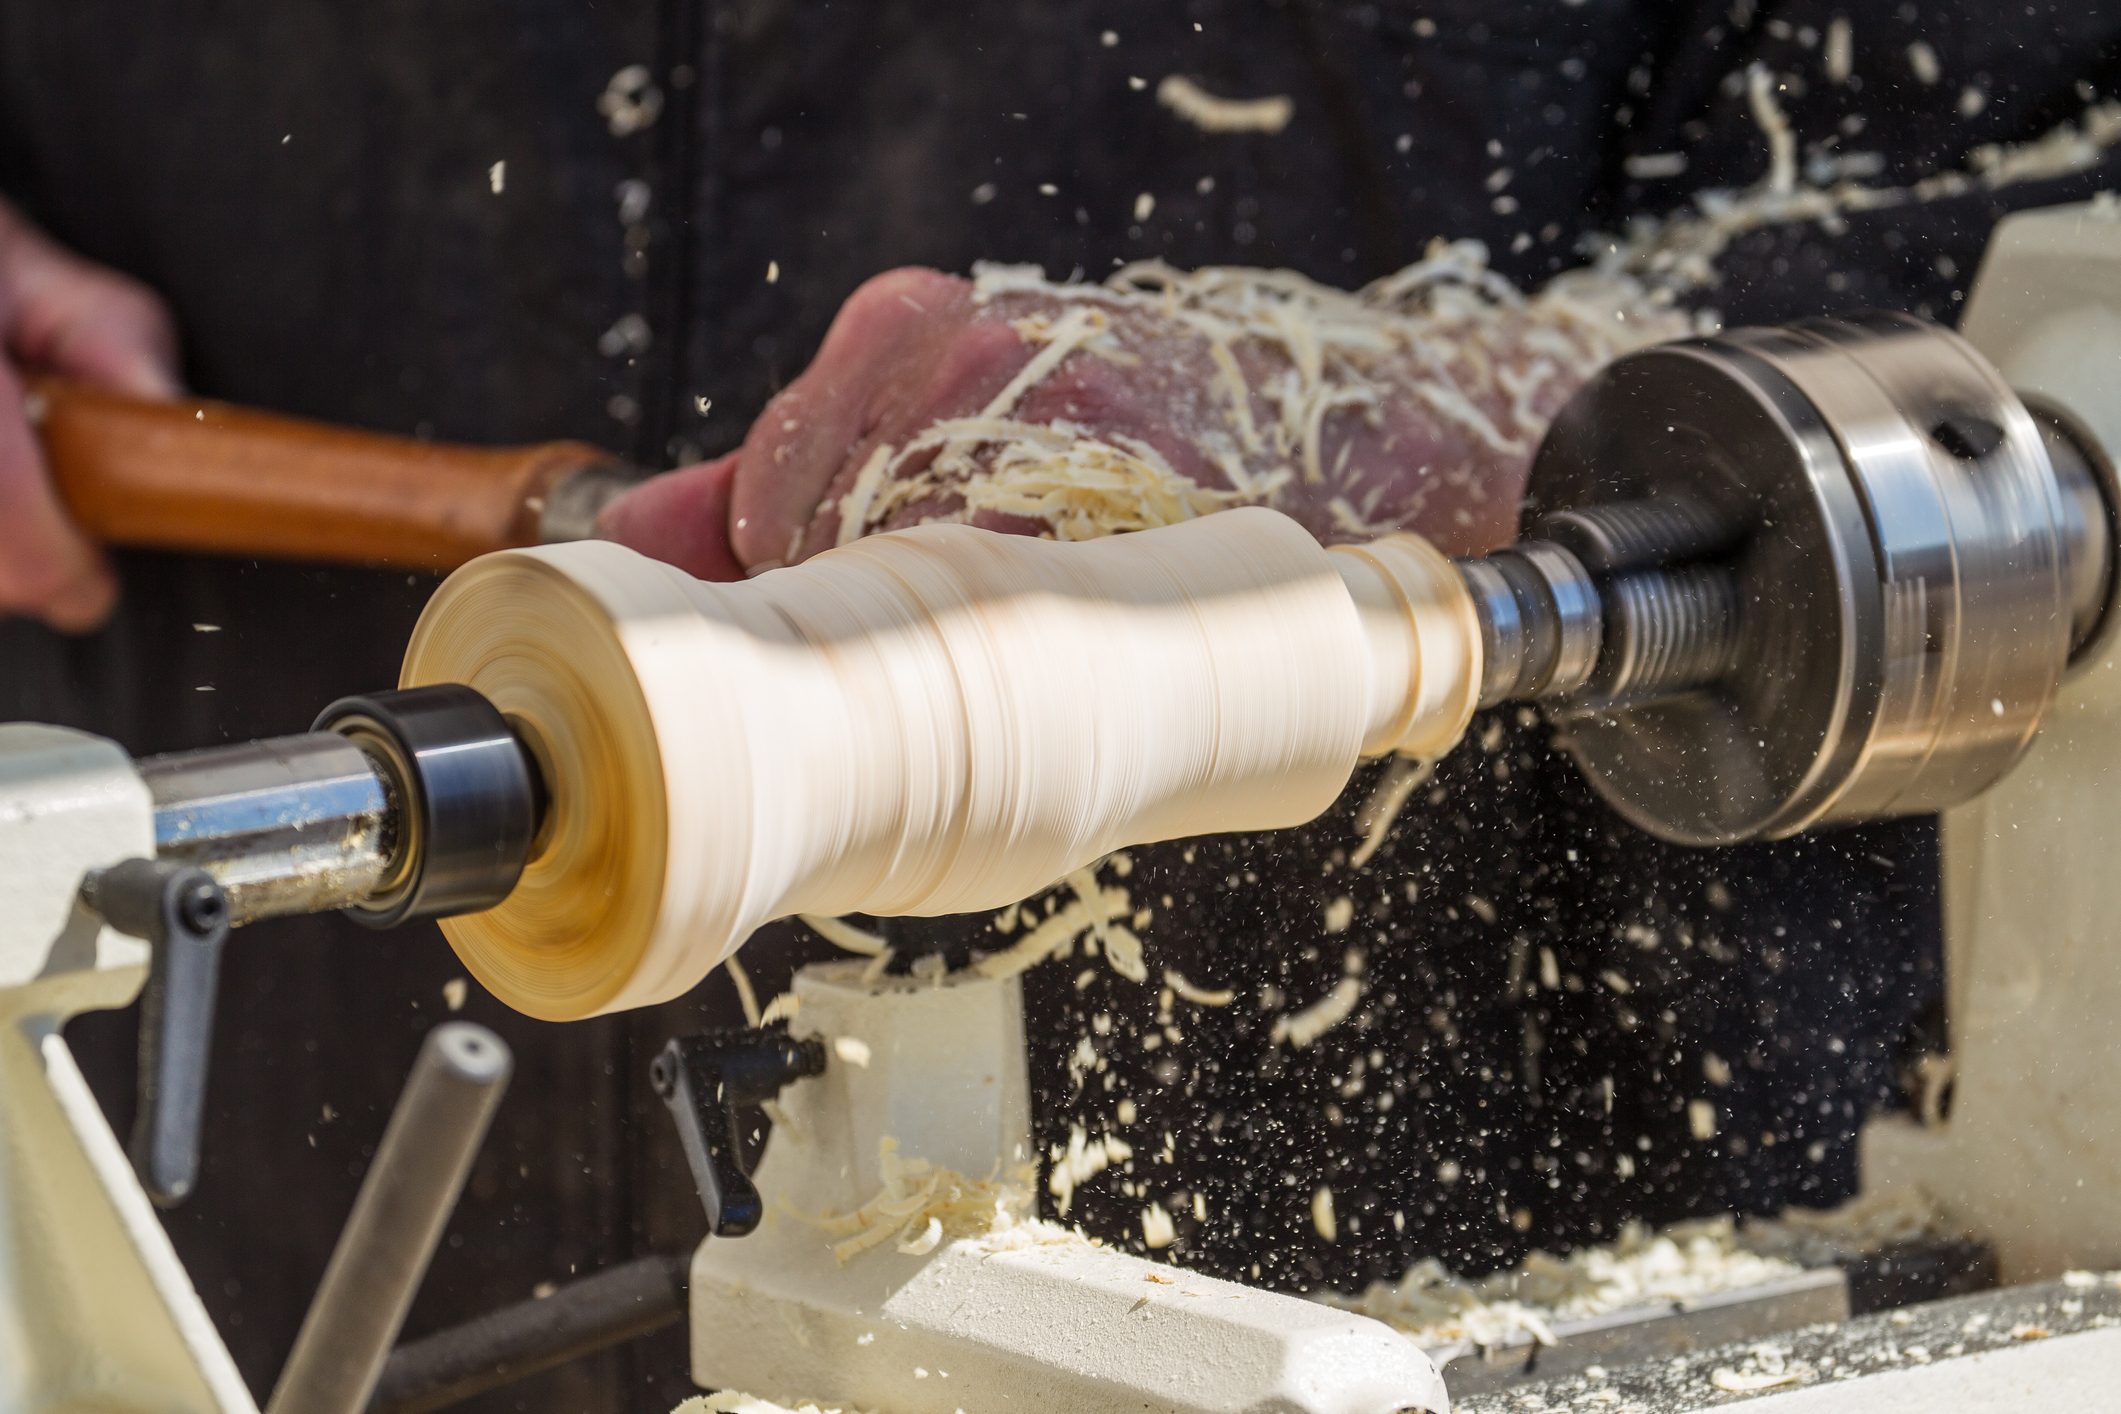 A man shapes a spindle on a lathe.